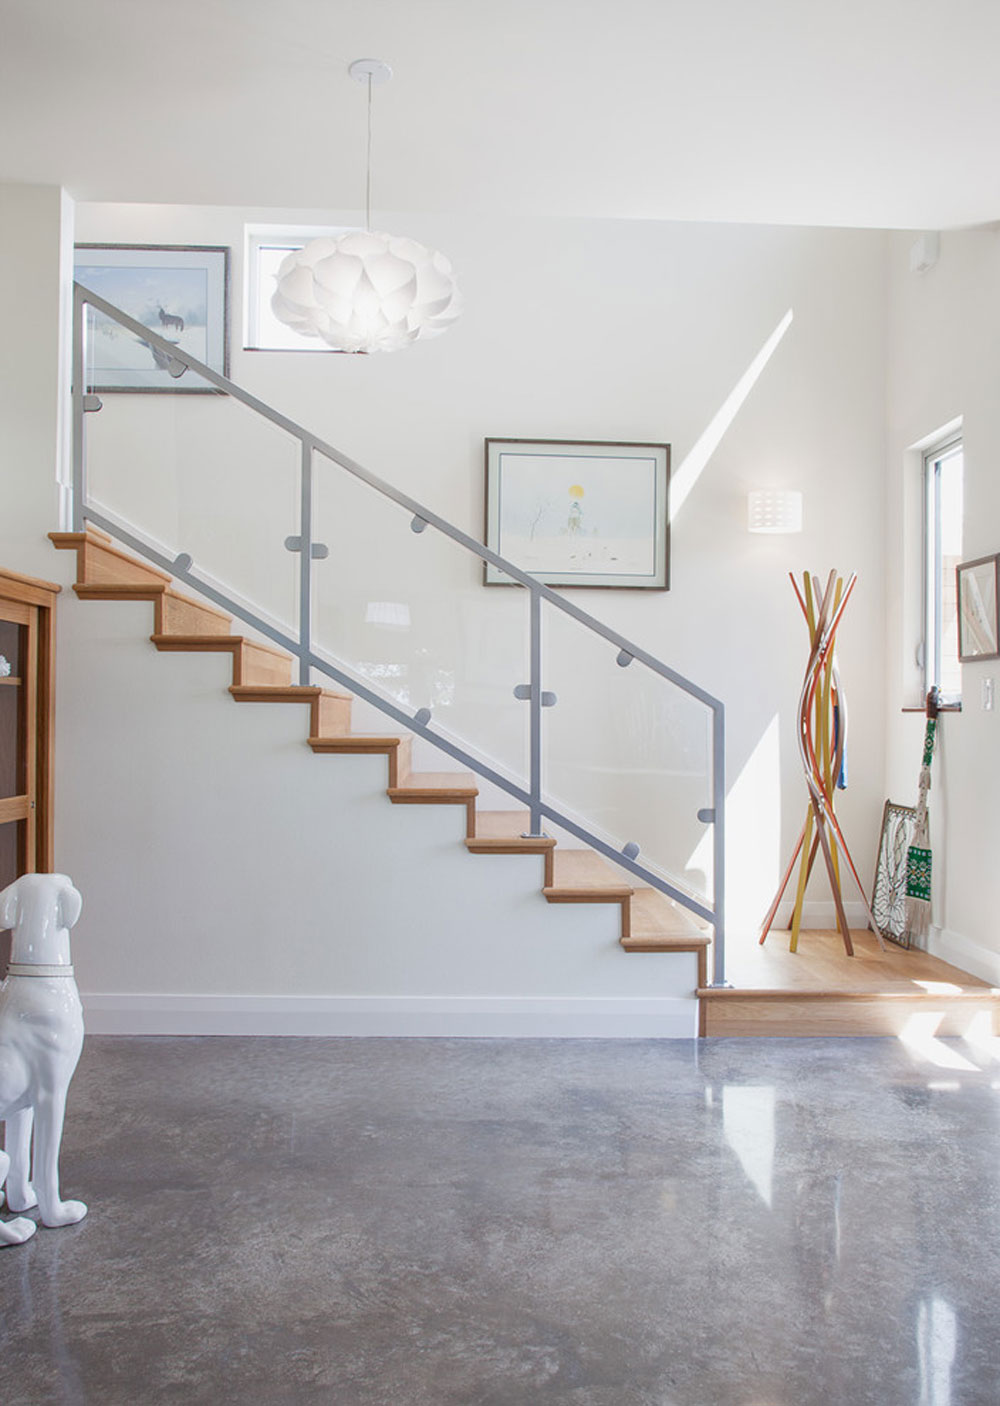 Hoffmanresidence-Staircase-by-Kailey-J.-Flynn-Photography Polished concrete floor: Advantages and disadvantages of having one